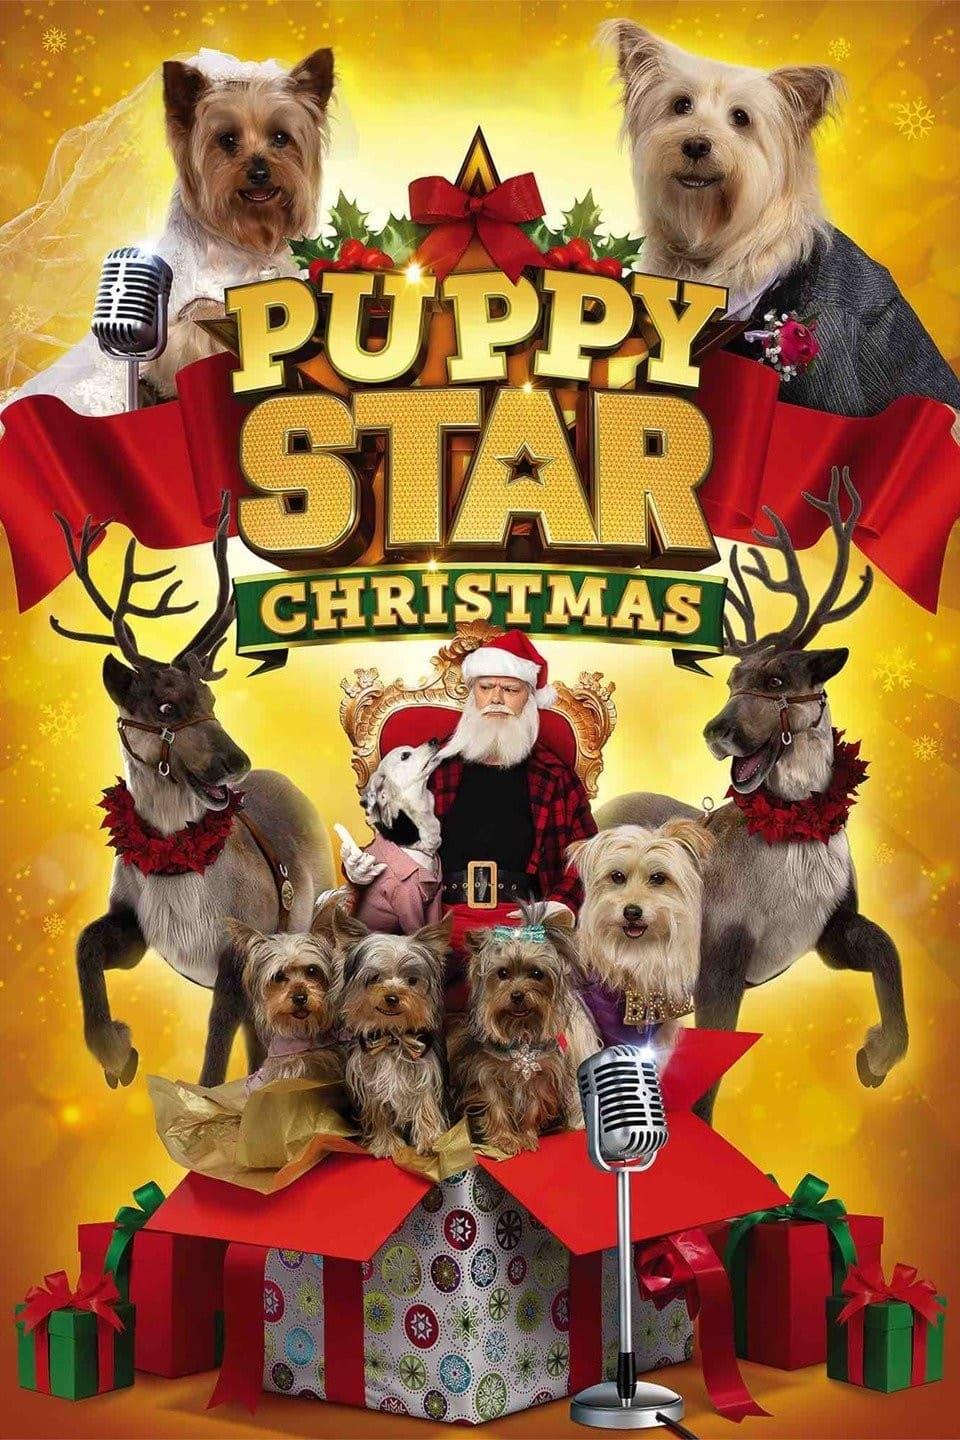 Puppy Star Christmas poster